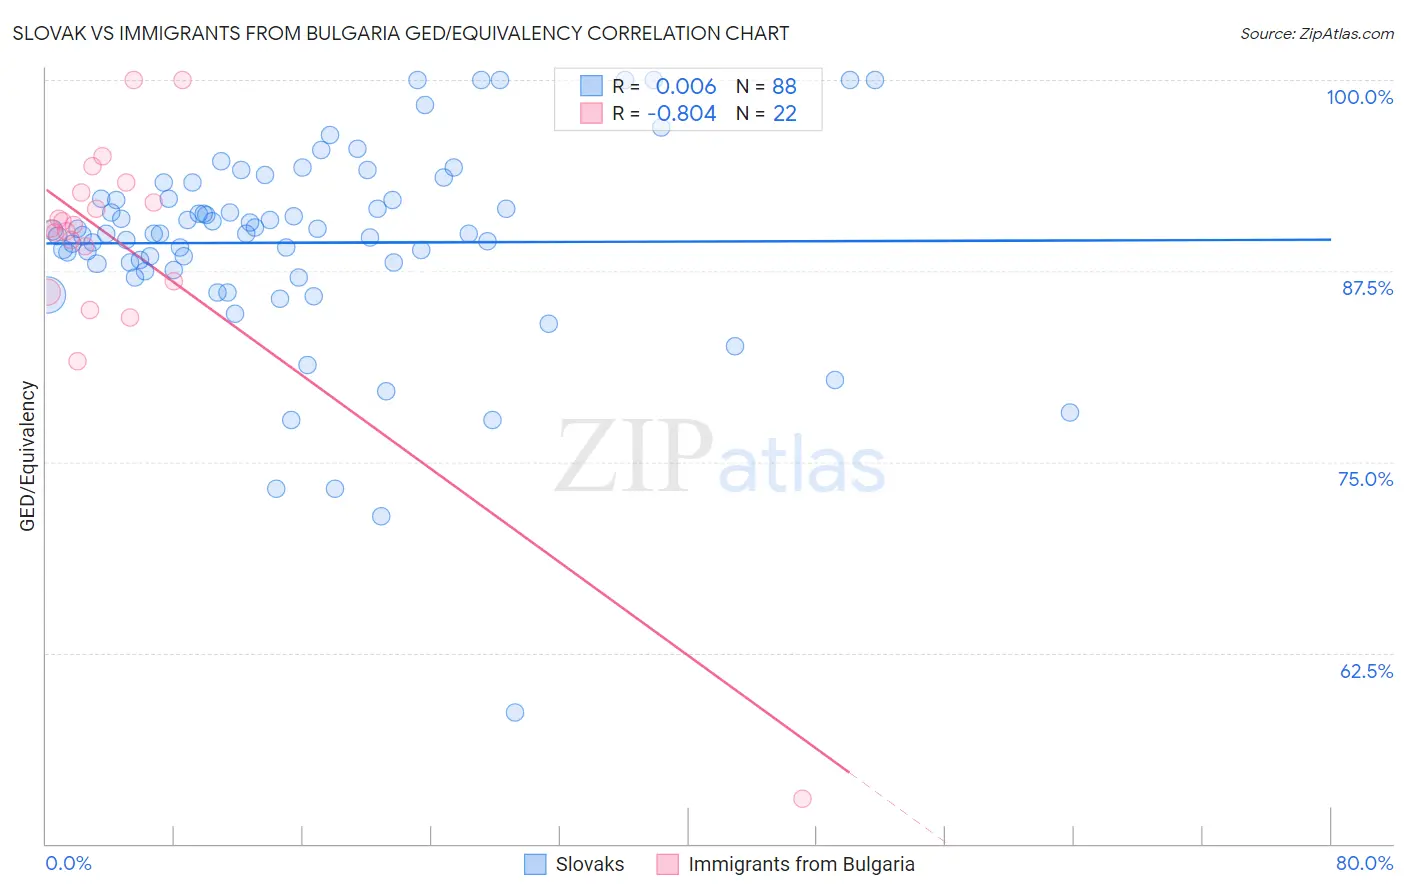 Slovak vs Immigrants from Bulgaria GED/Equivalency